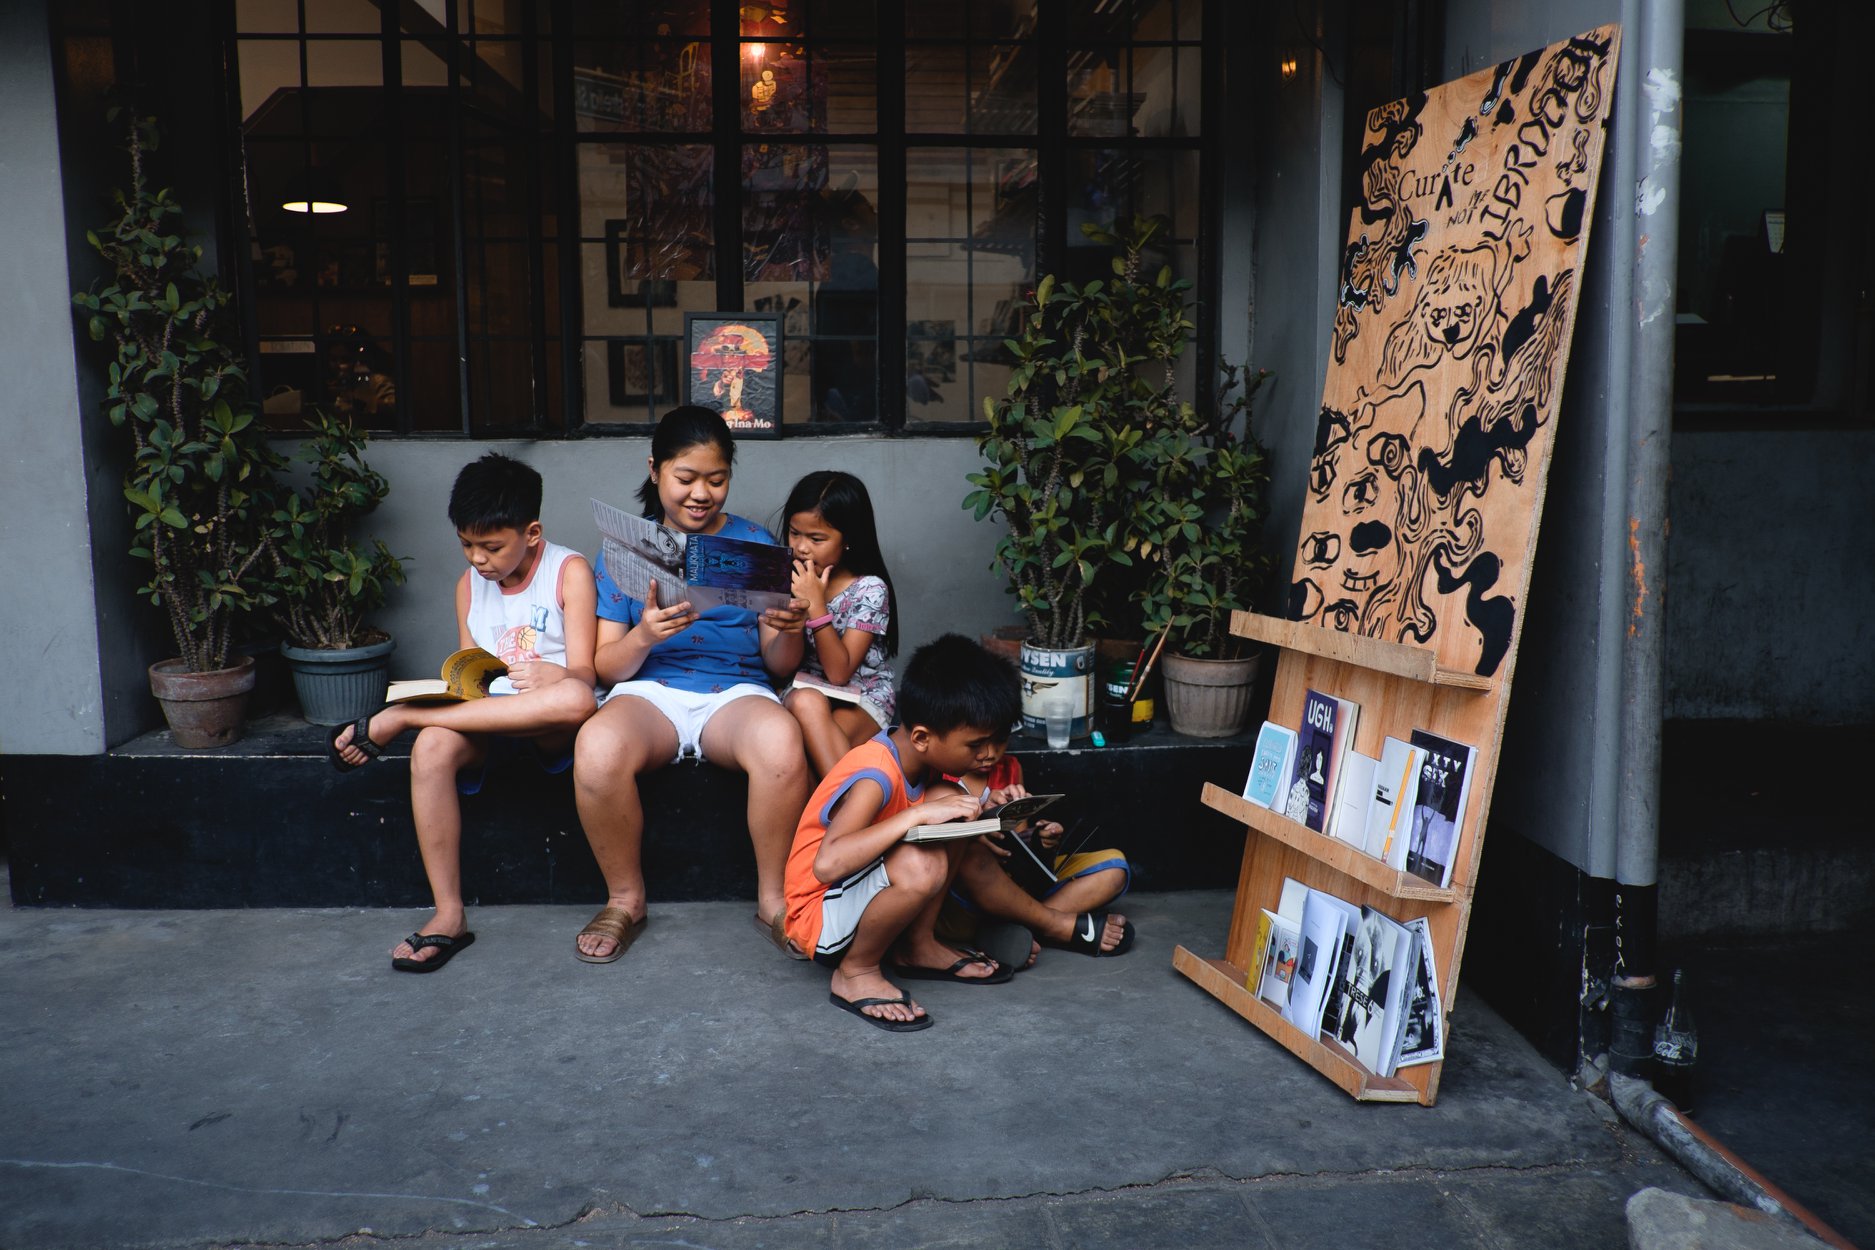 A group of children sitting outside of a café reading books.